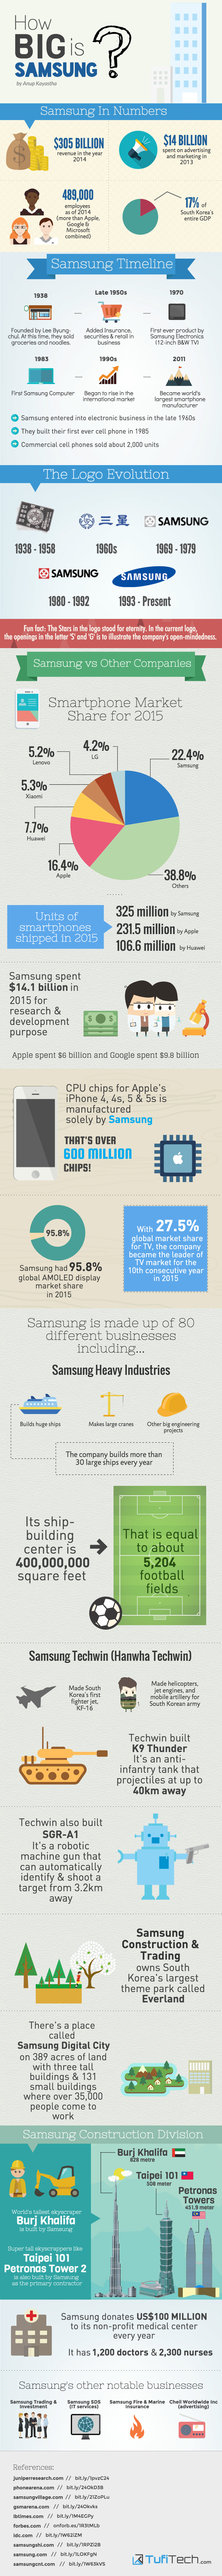 Samsung: More Than Just An Electronics Company